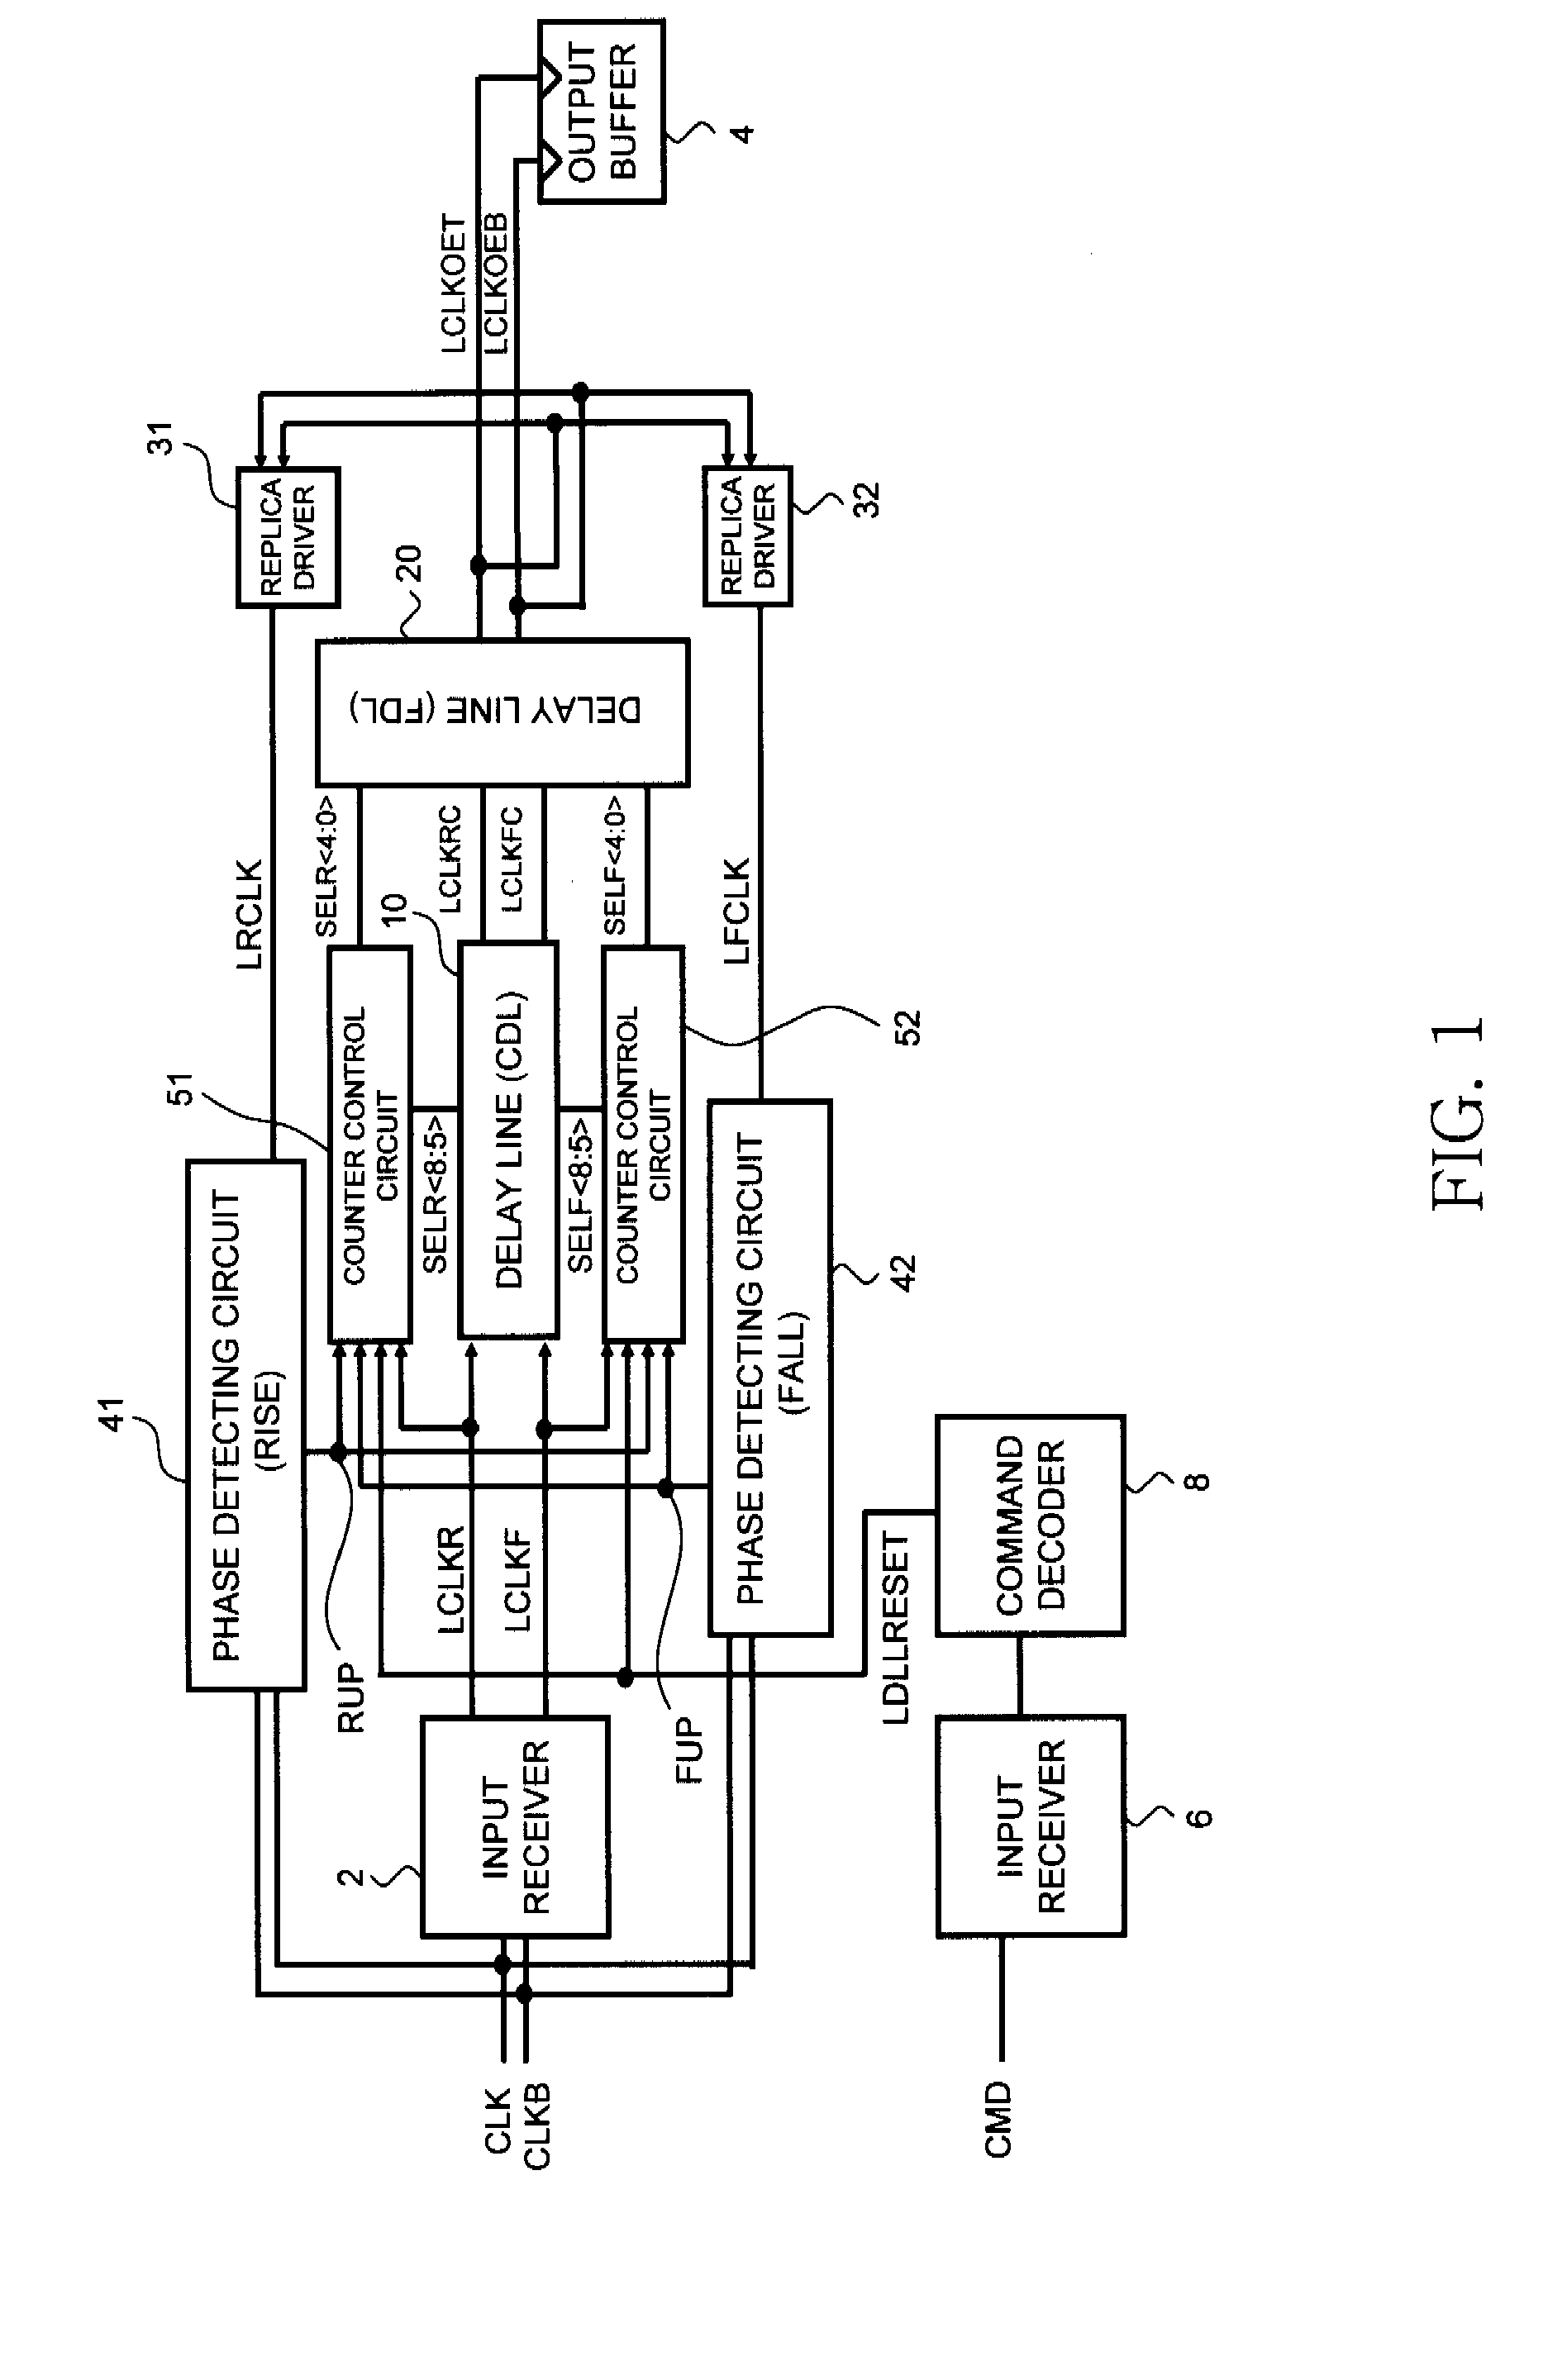 Dll circuit, semiconductor memory device using the same, and data processing system